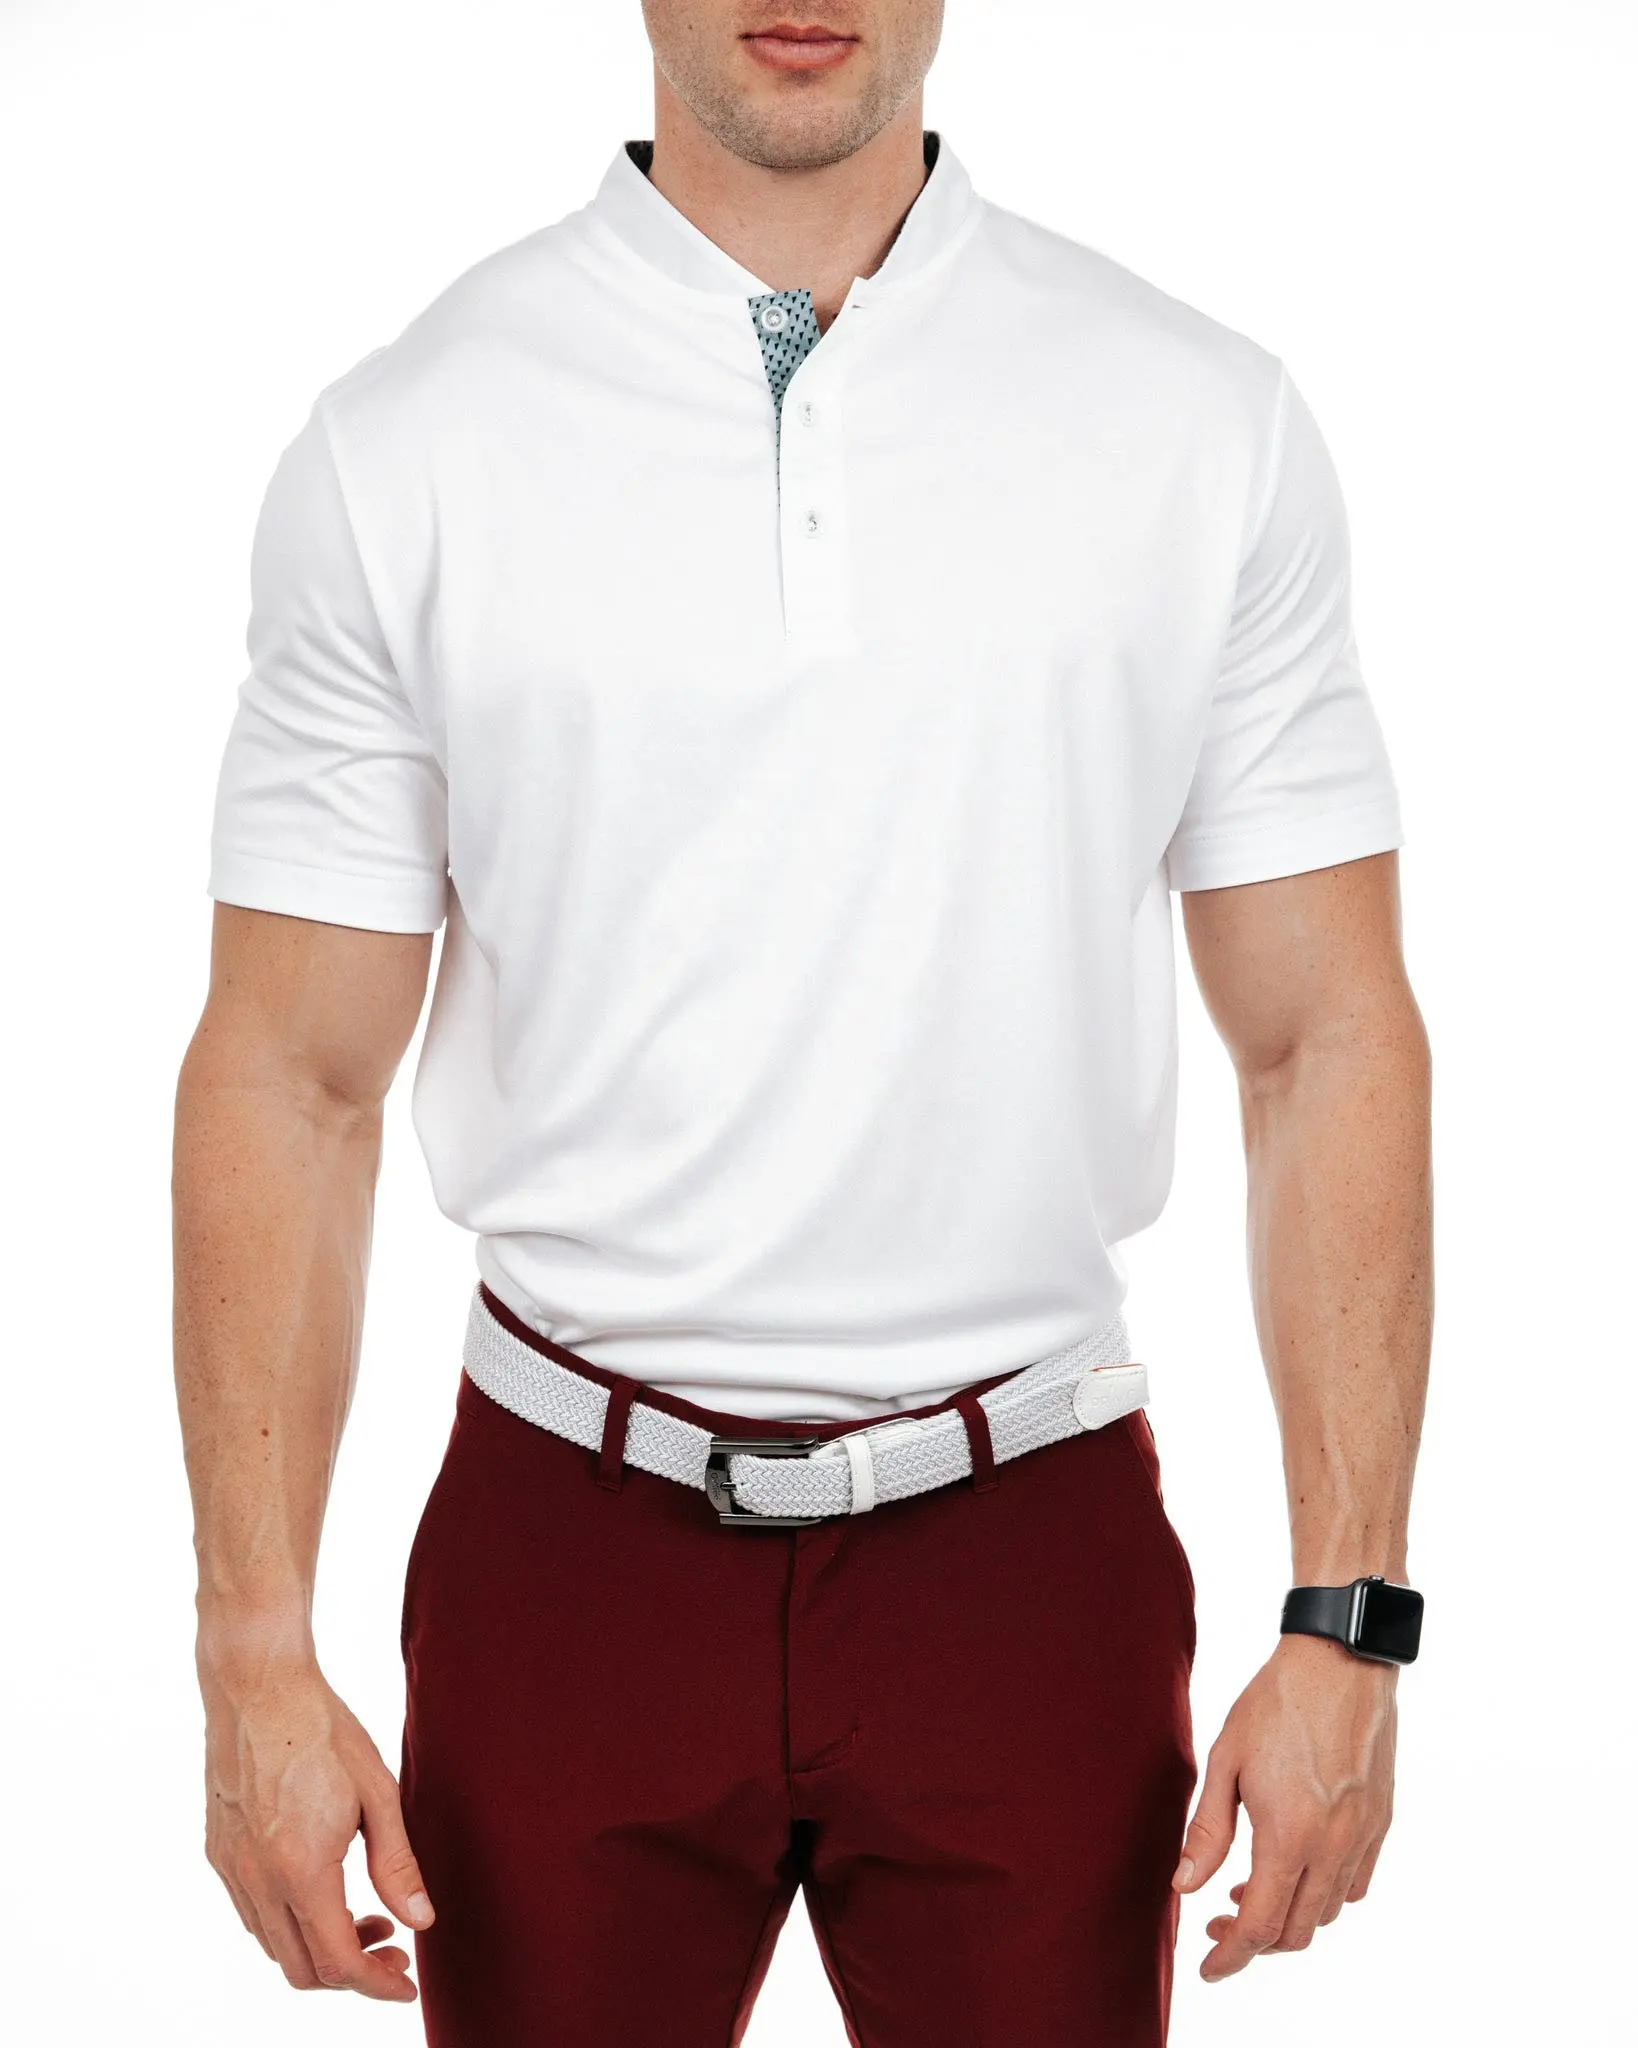 Wholesale Hot Style solid color custom LOGO printed Golf Polo men shirts short sleeve Fashion casual men's clothing